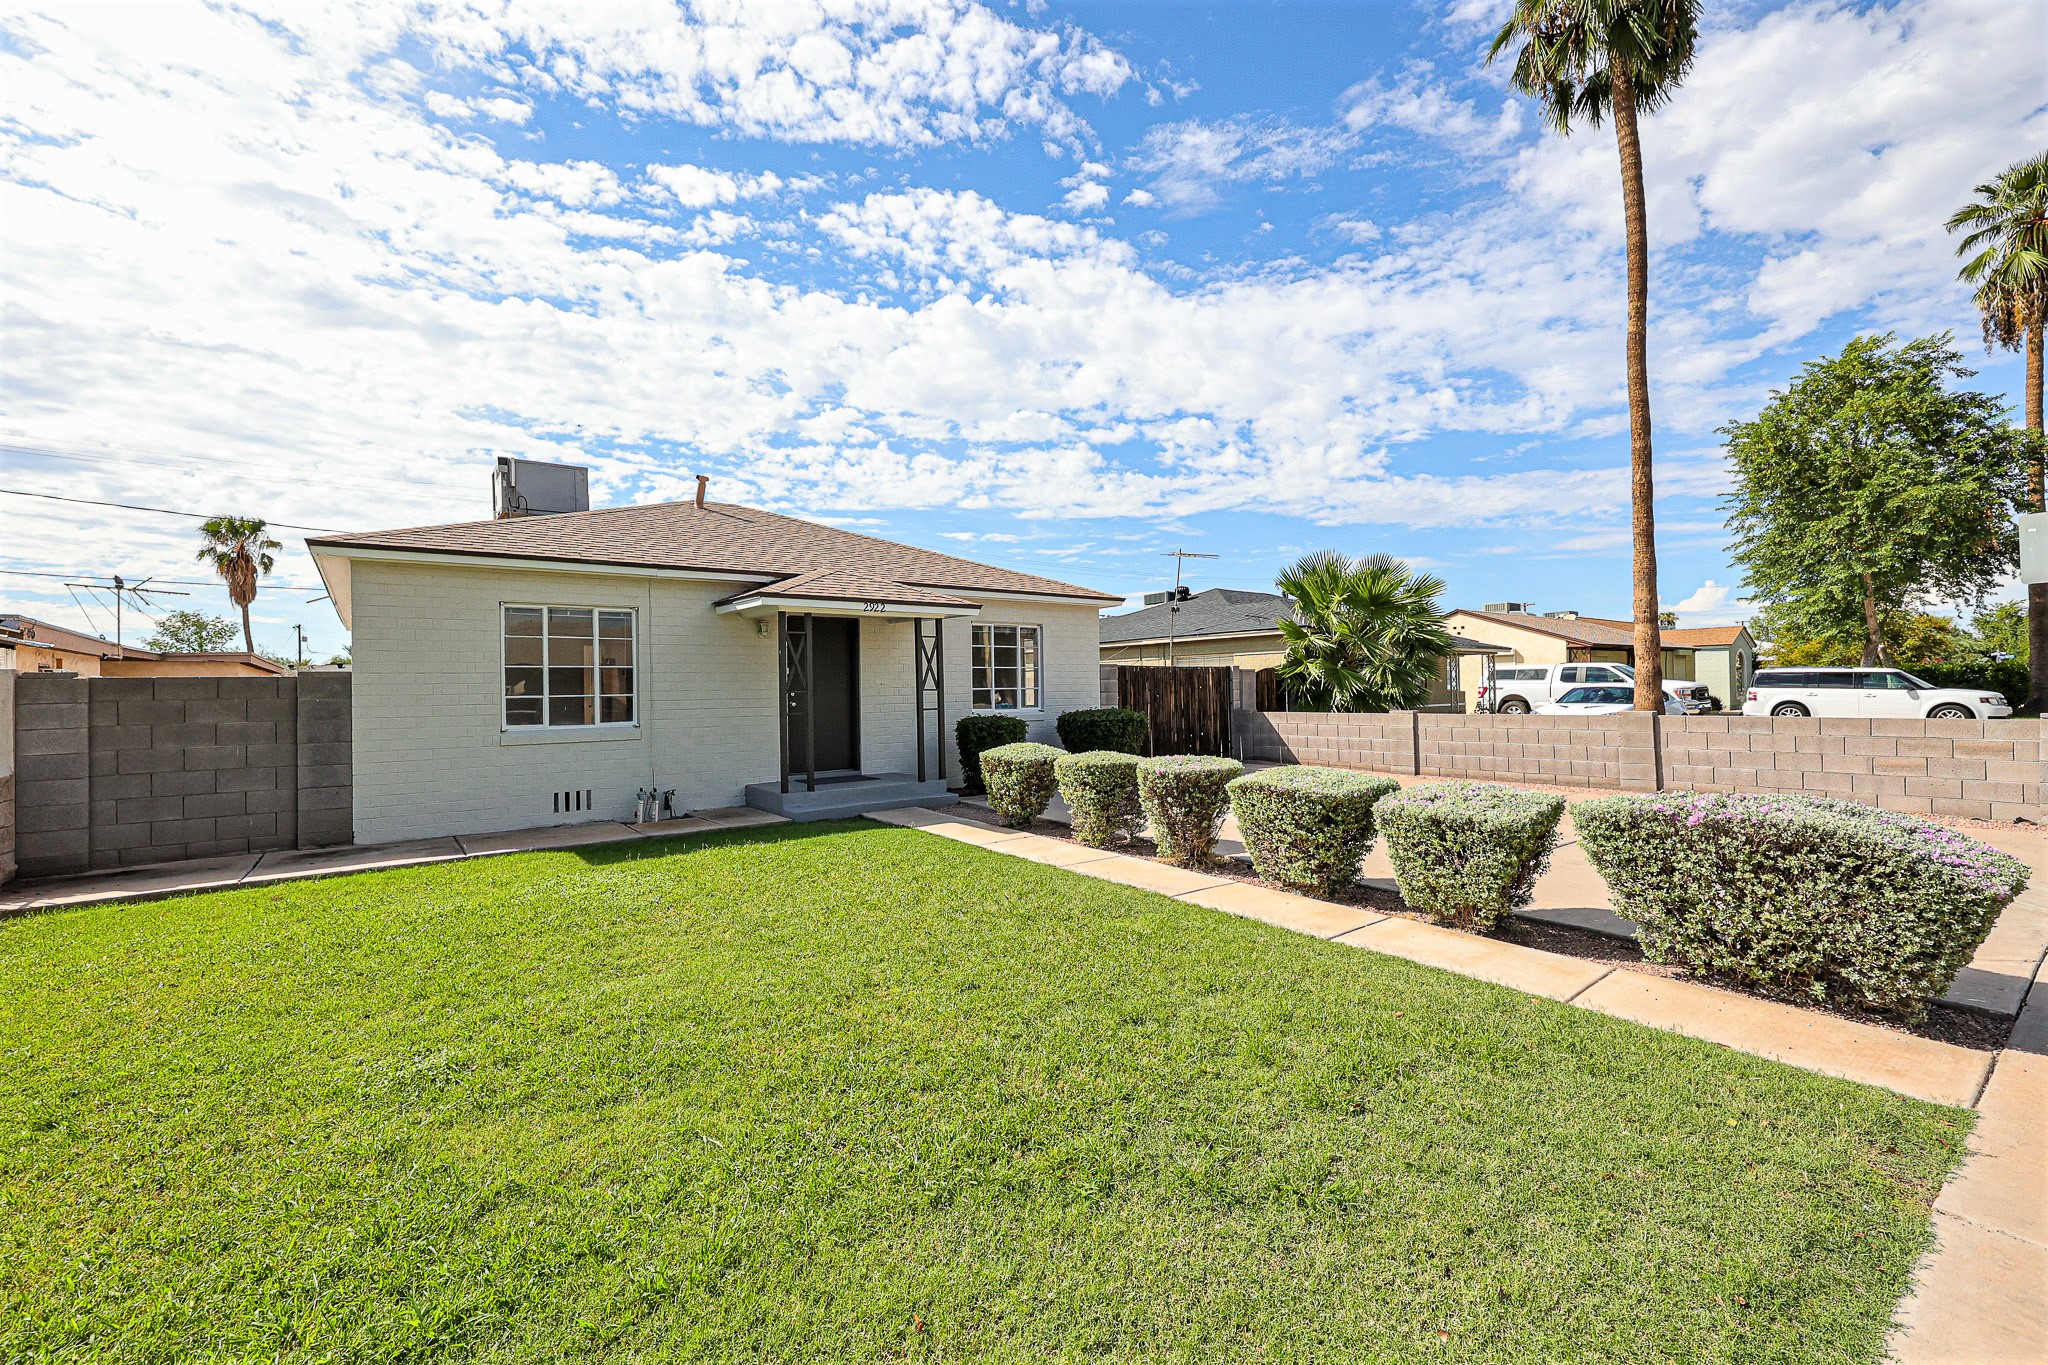 north encanto historic district, home for sale, transitional ranch, real estate, phoenix, historic, homes